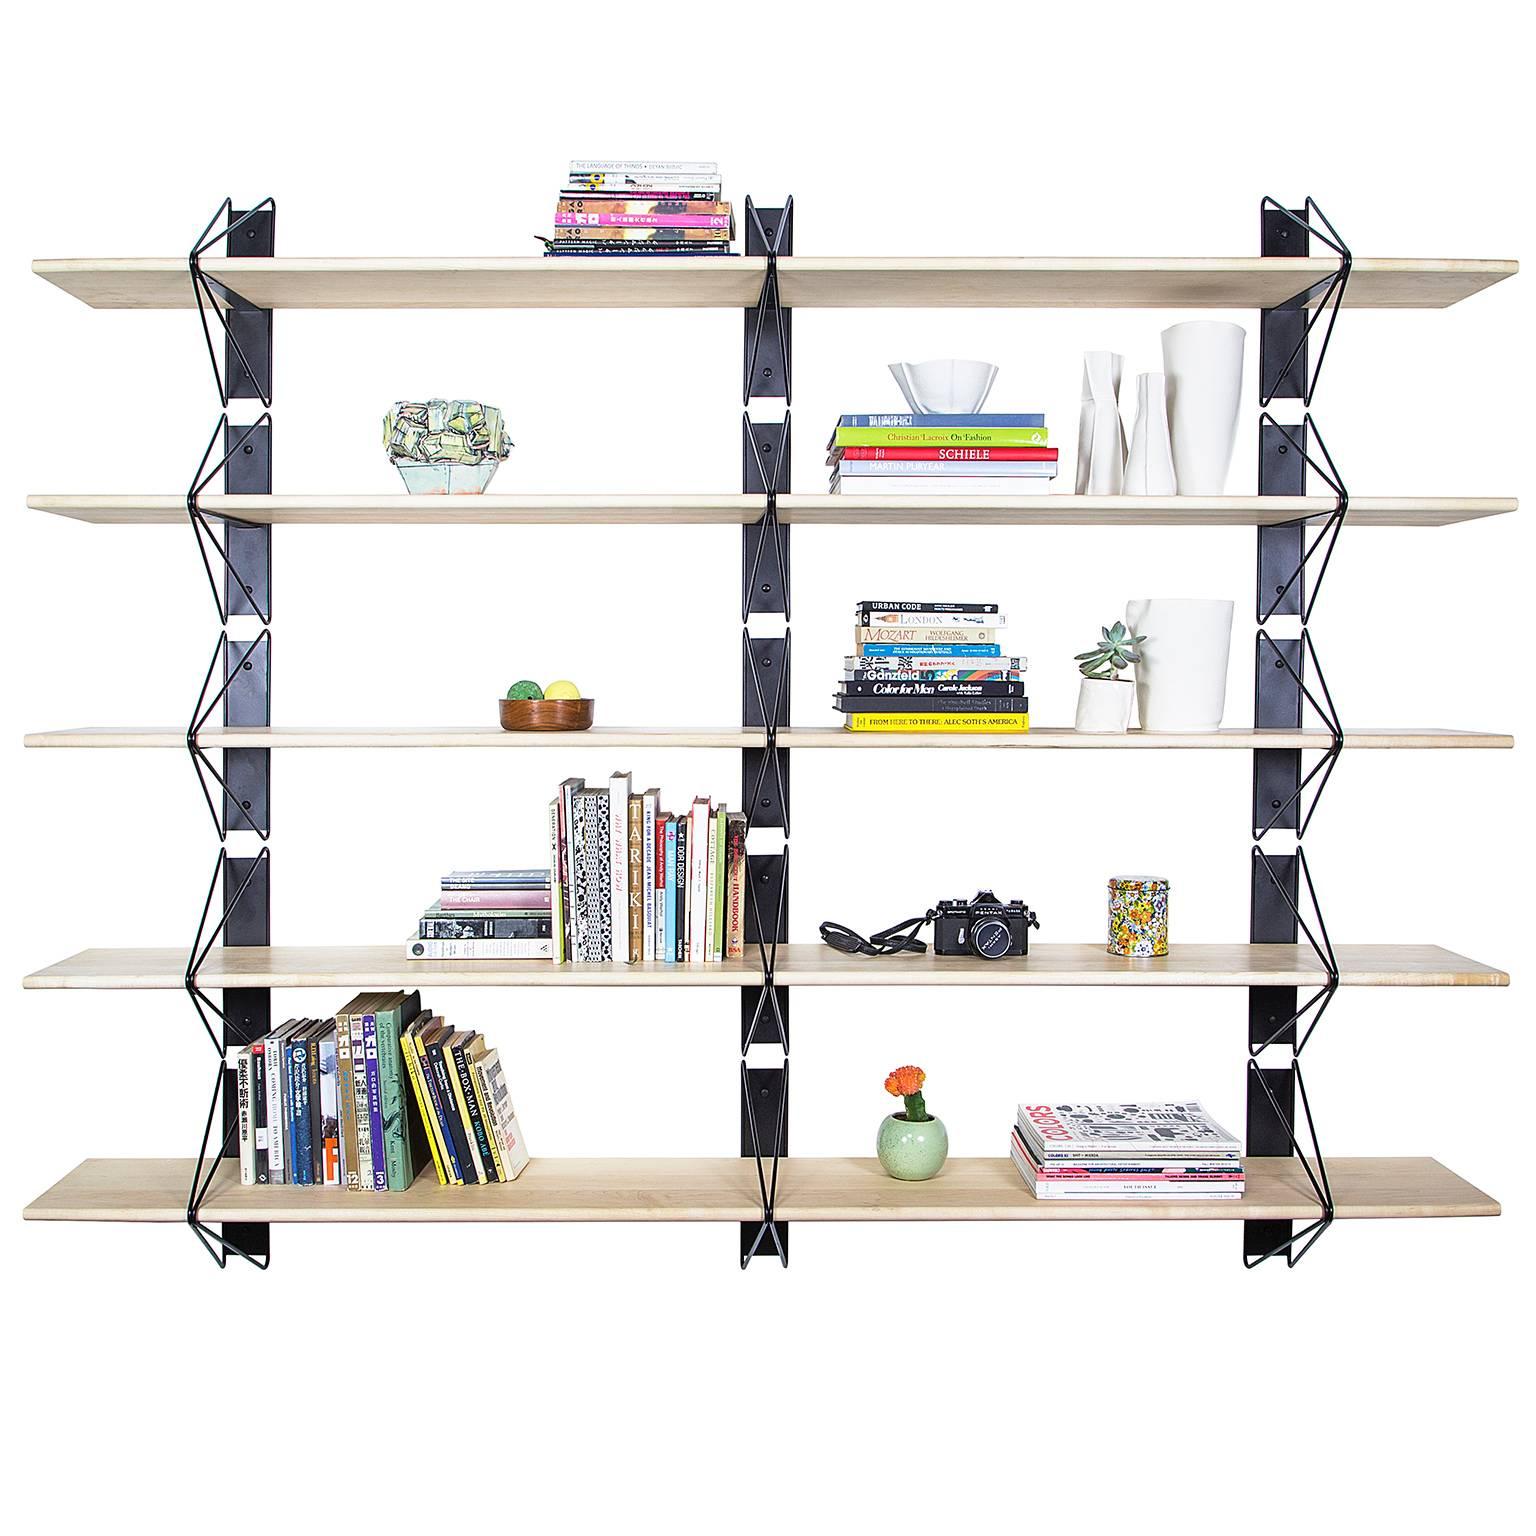 Oiled Set of 3 Strut Shelves from Souda, 52in, Black and Maple, Made to Order For Sale